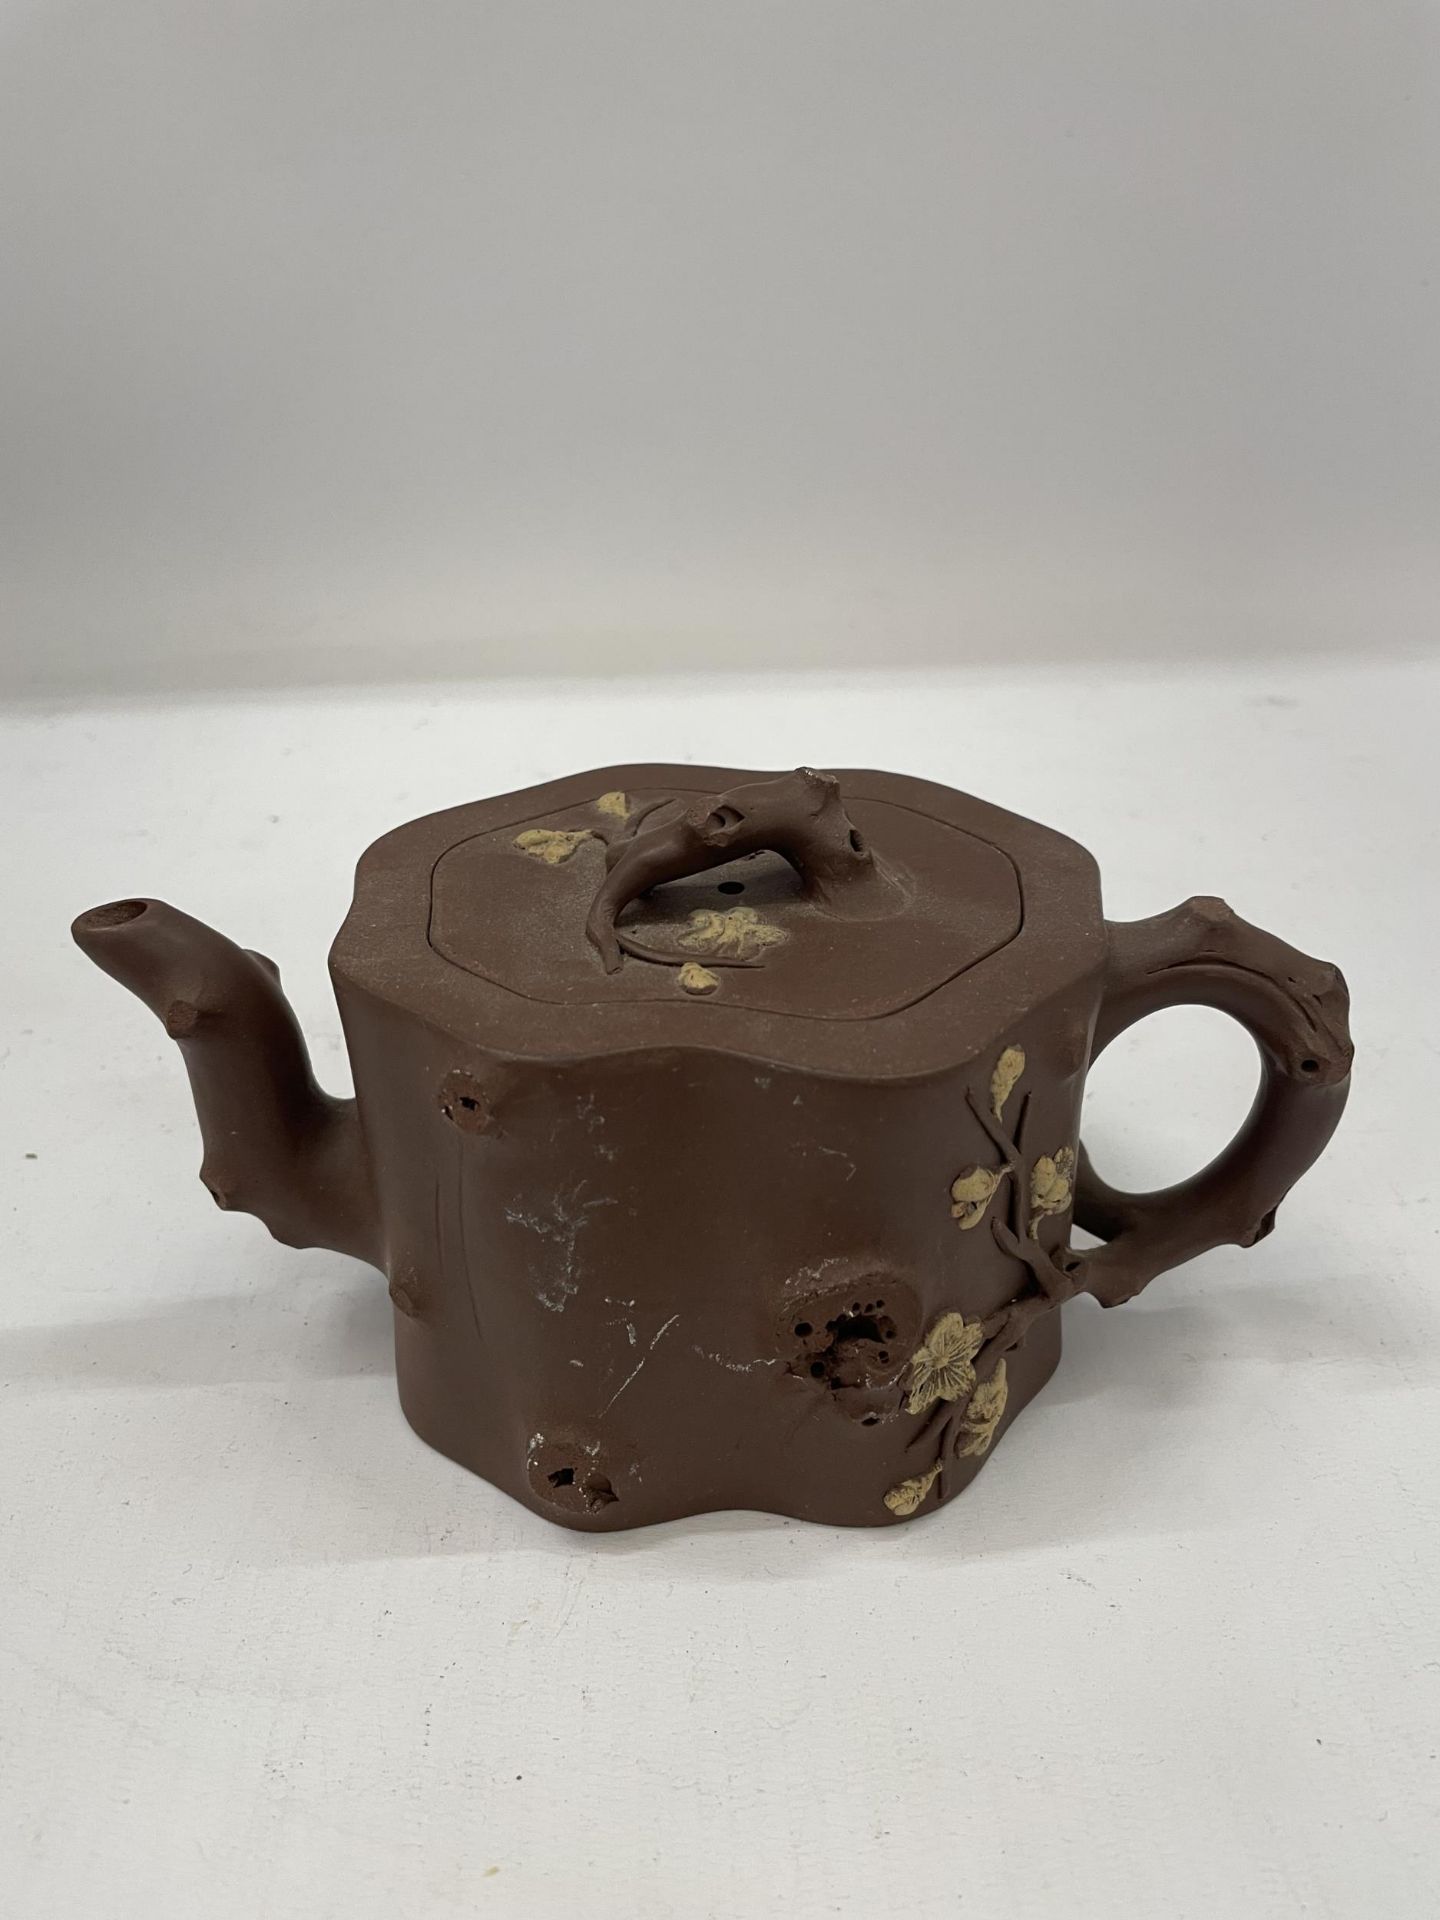 A CHINESE YIXING STYLE CLAY TEAPOT WITH FLORAL DESIGN